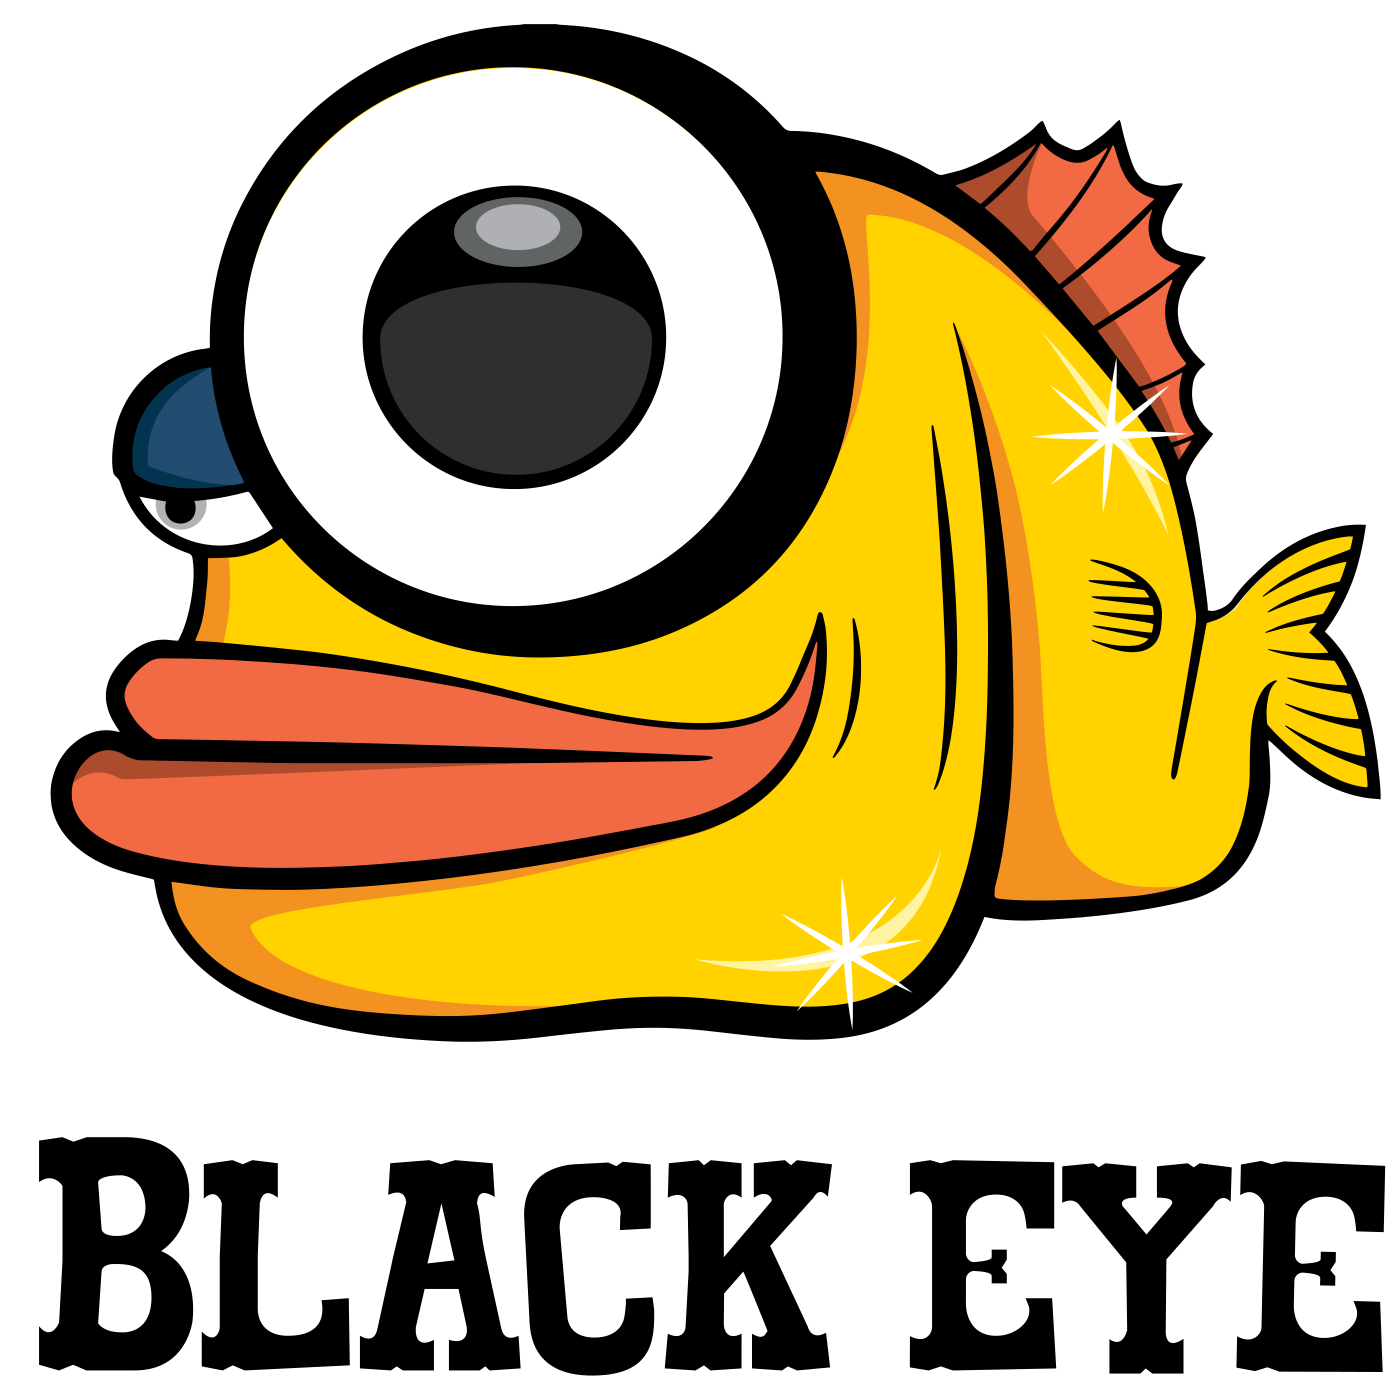 Black Eye Logo - Black Eye - Wide G4 - Universal smartphone lens for IOS and Android